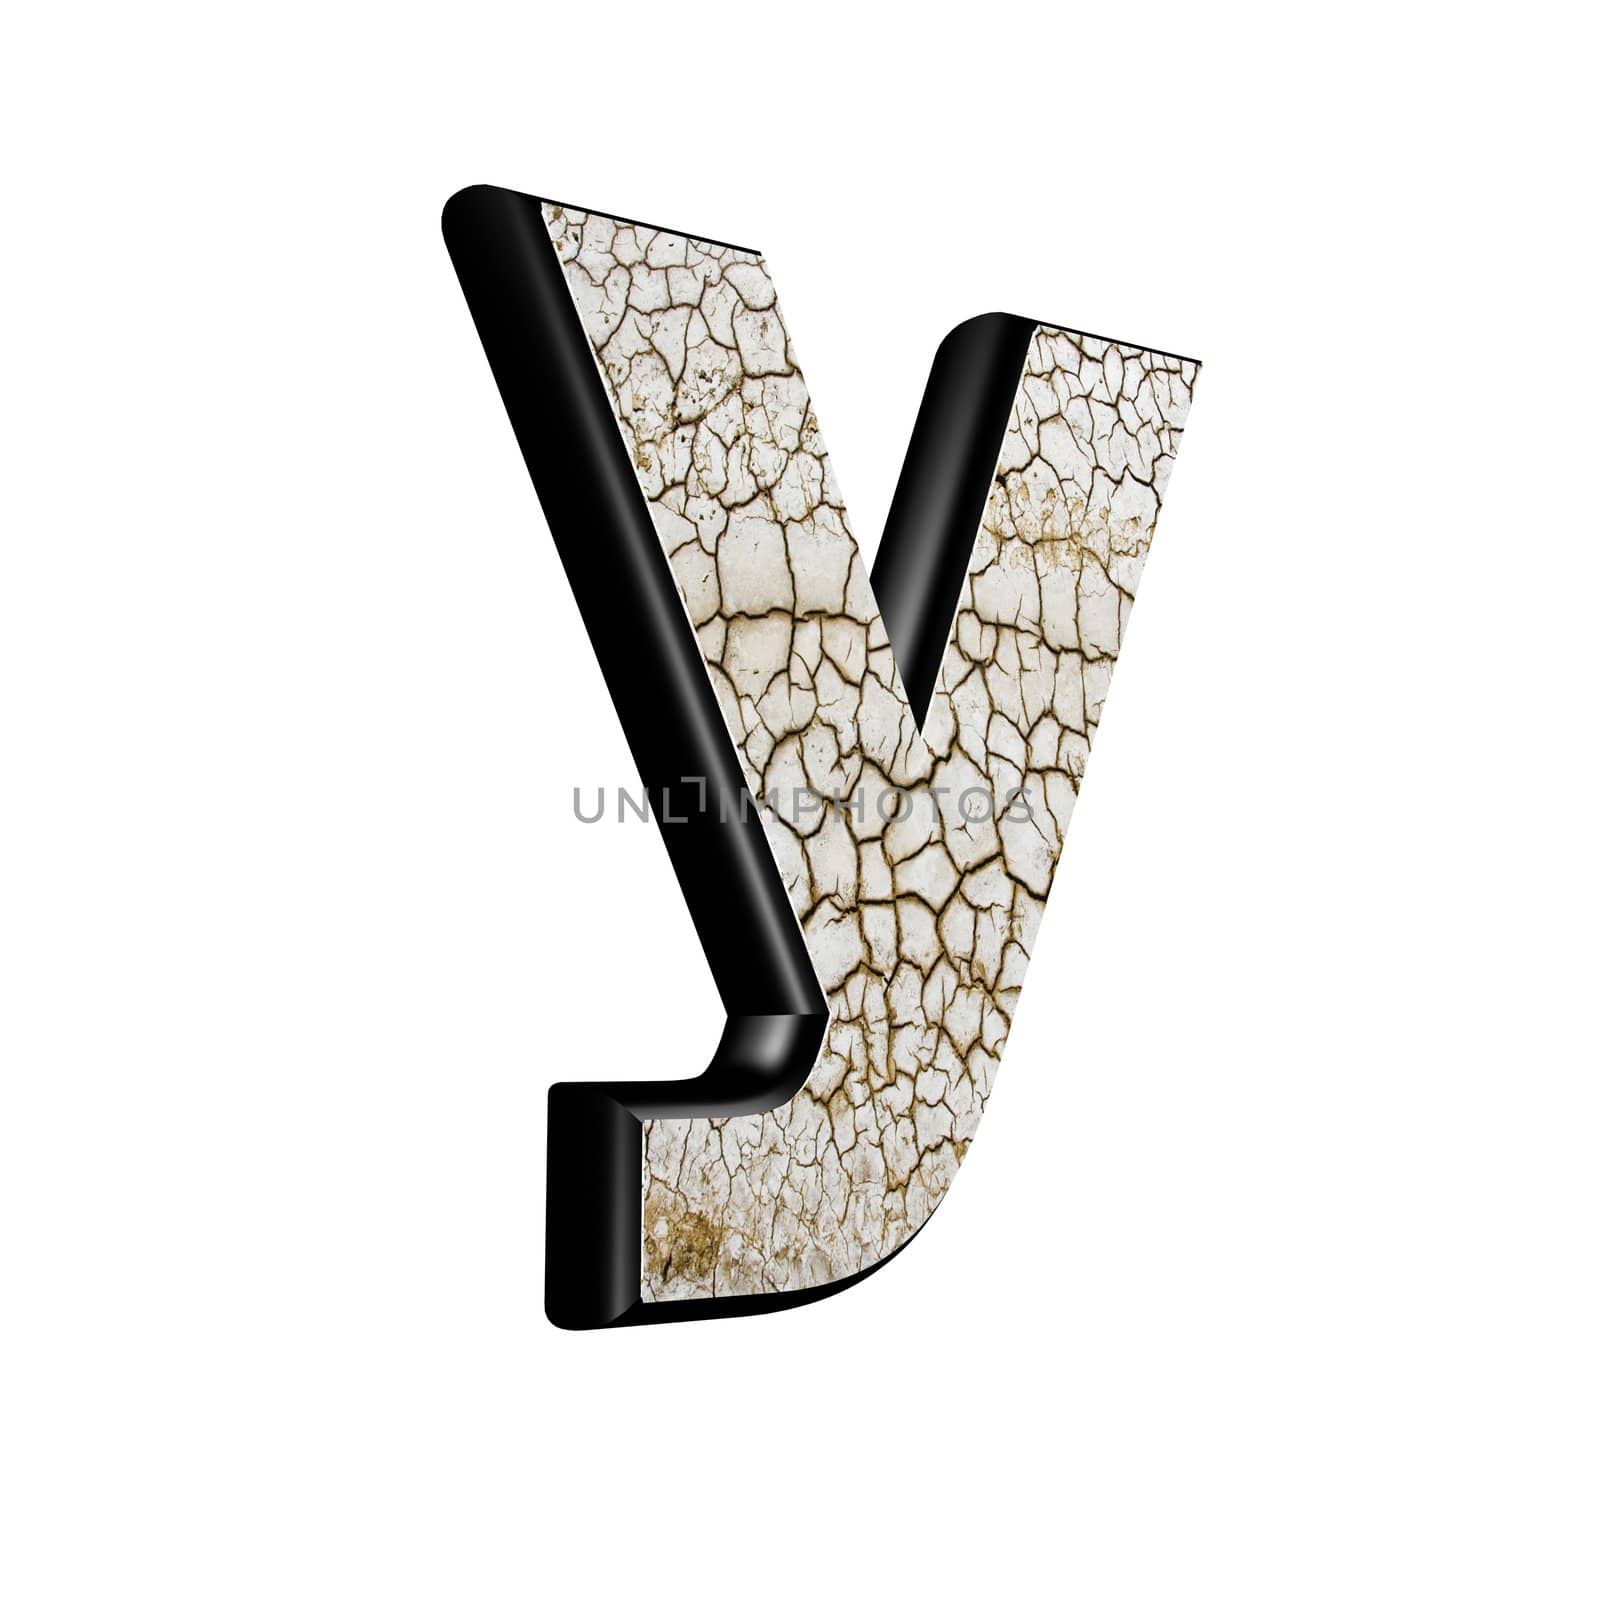 abstract 3d letter with dry ground texture - Y by chrisroll